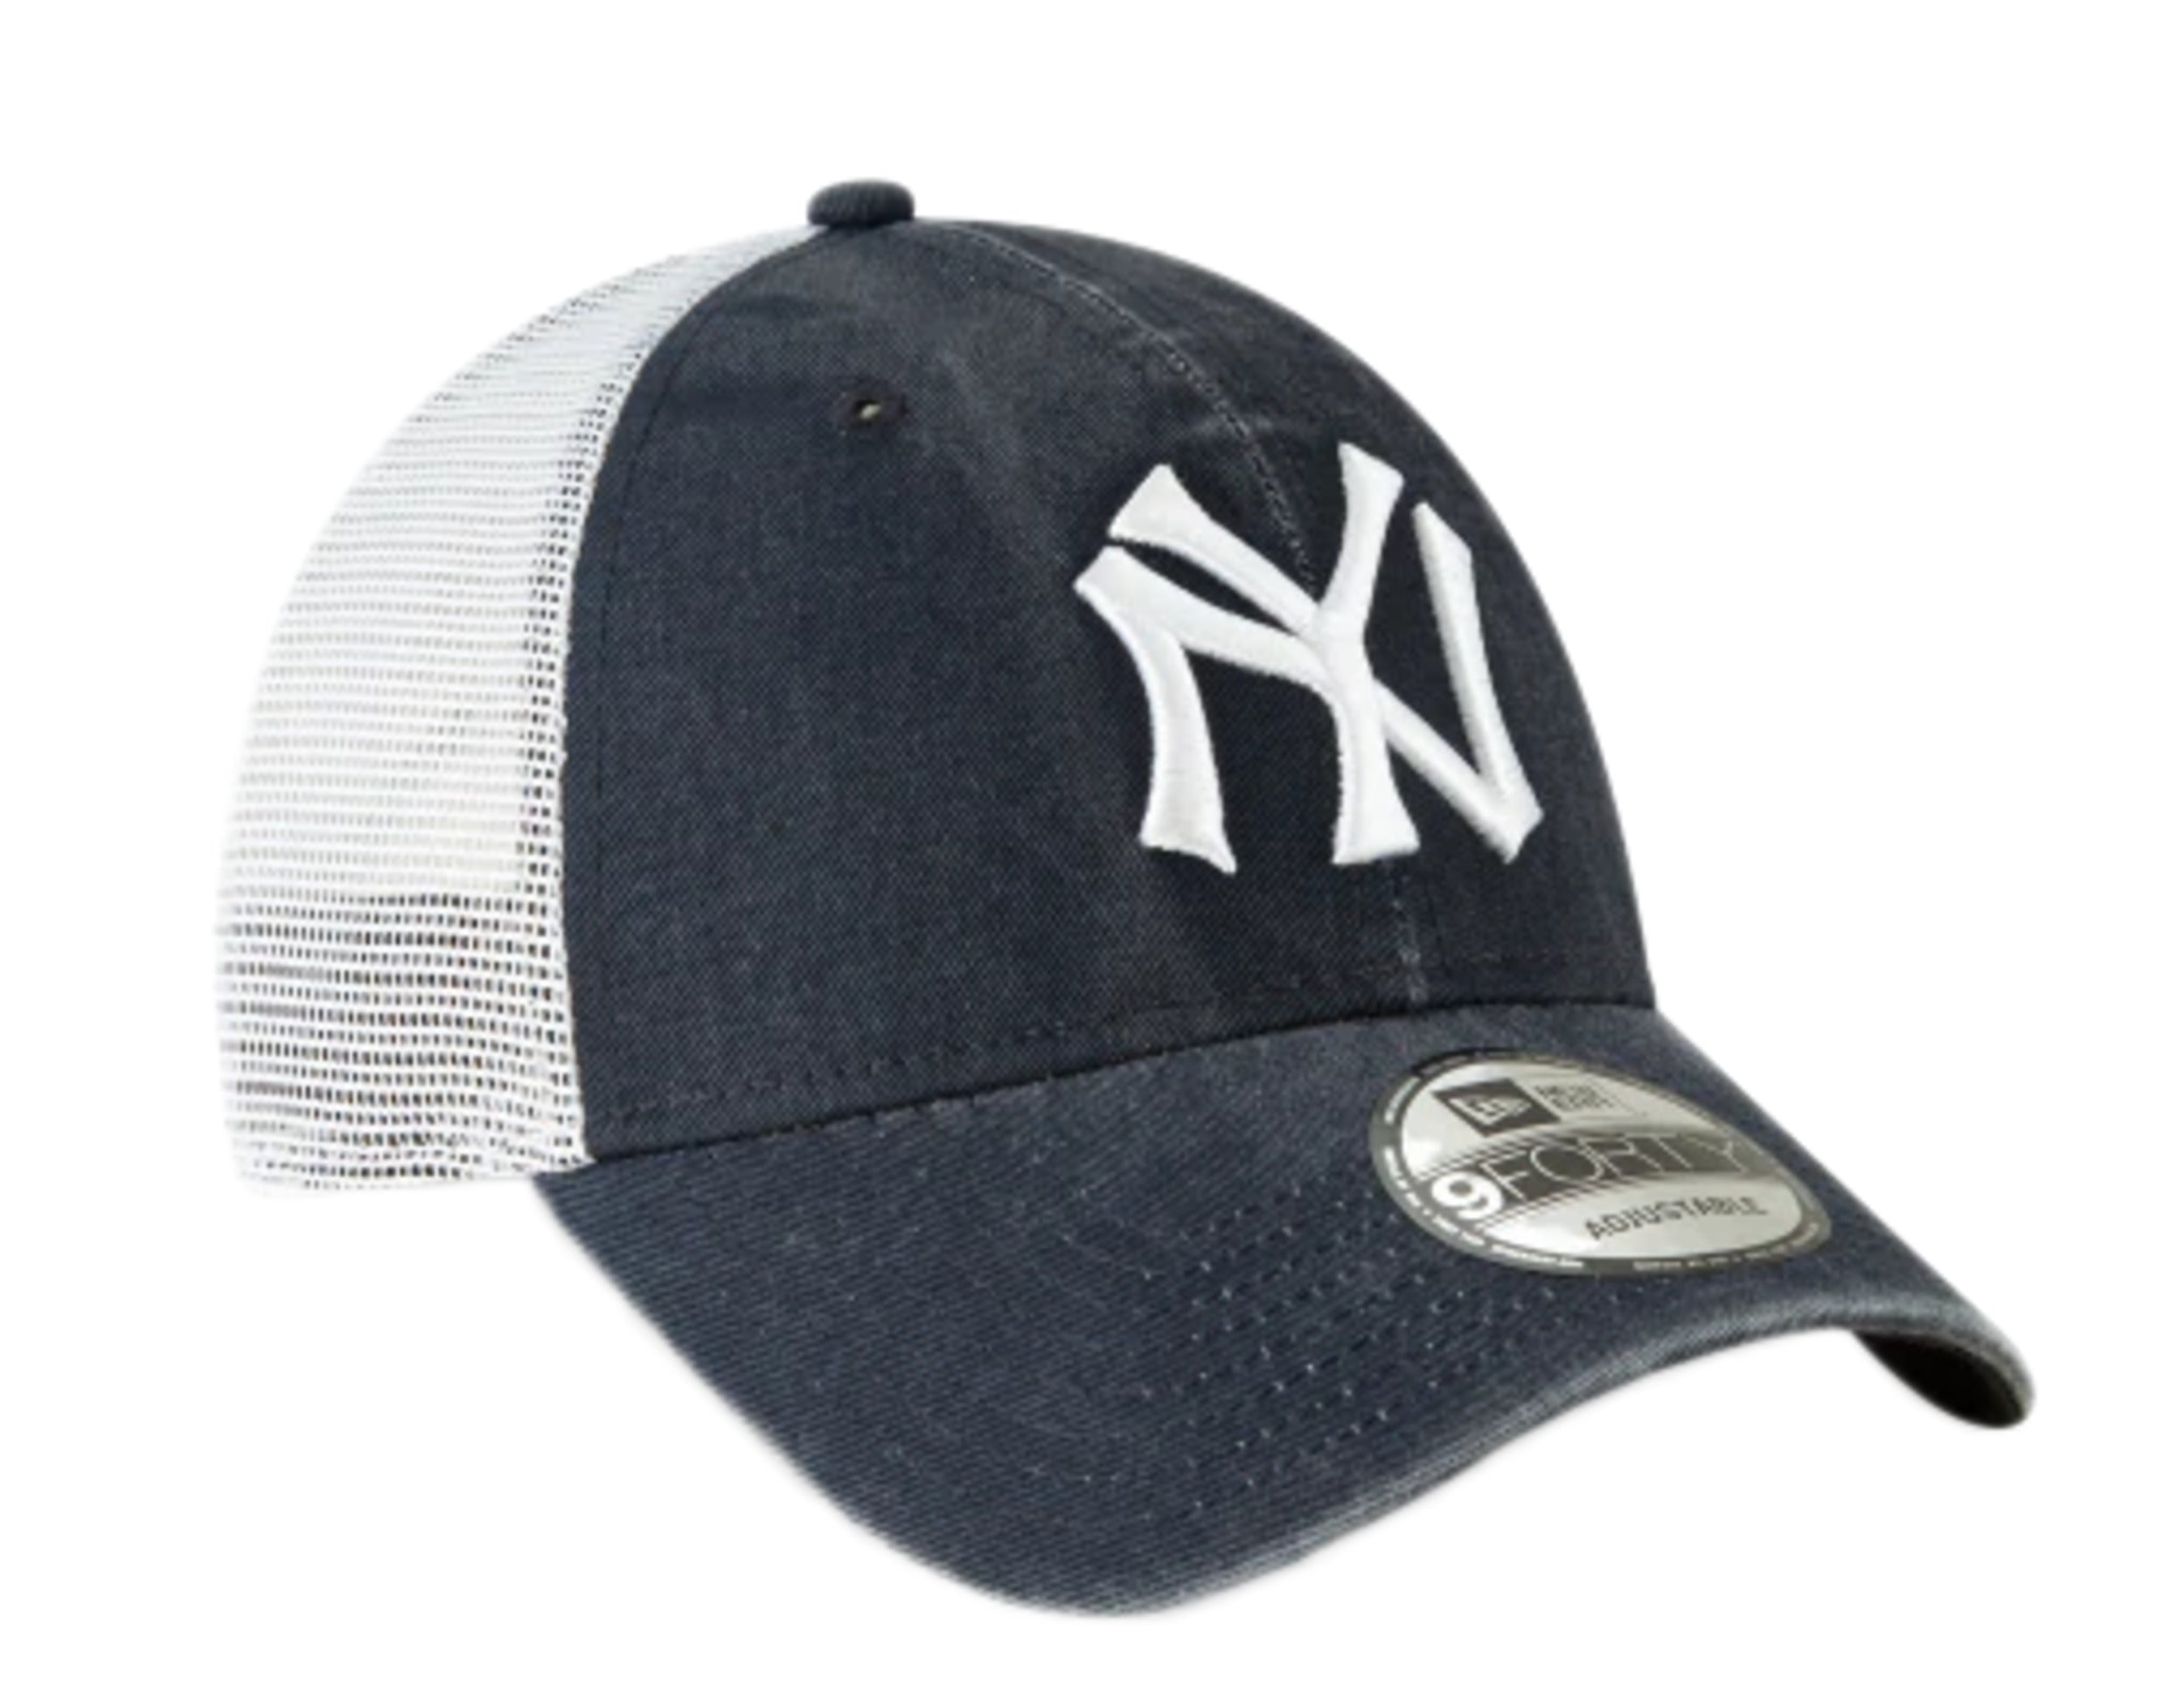 New York Yankees Flame 9FORTY Cap